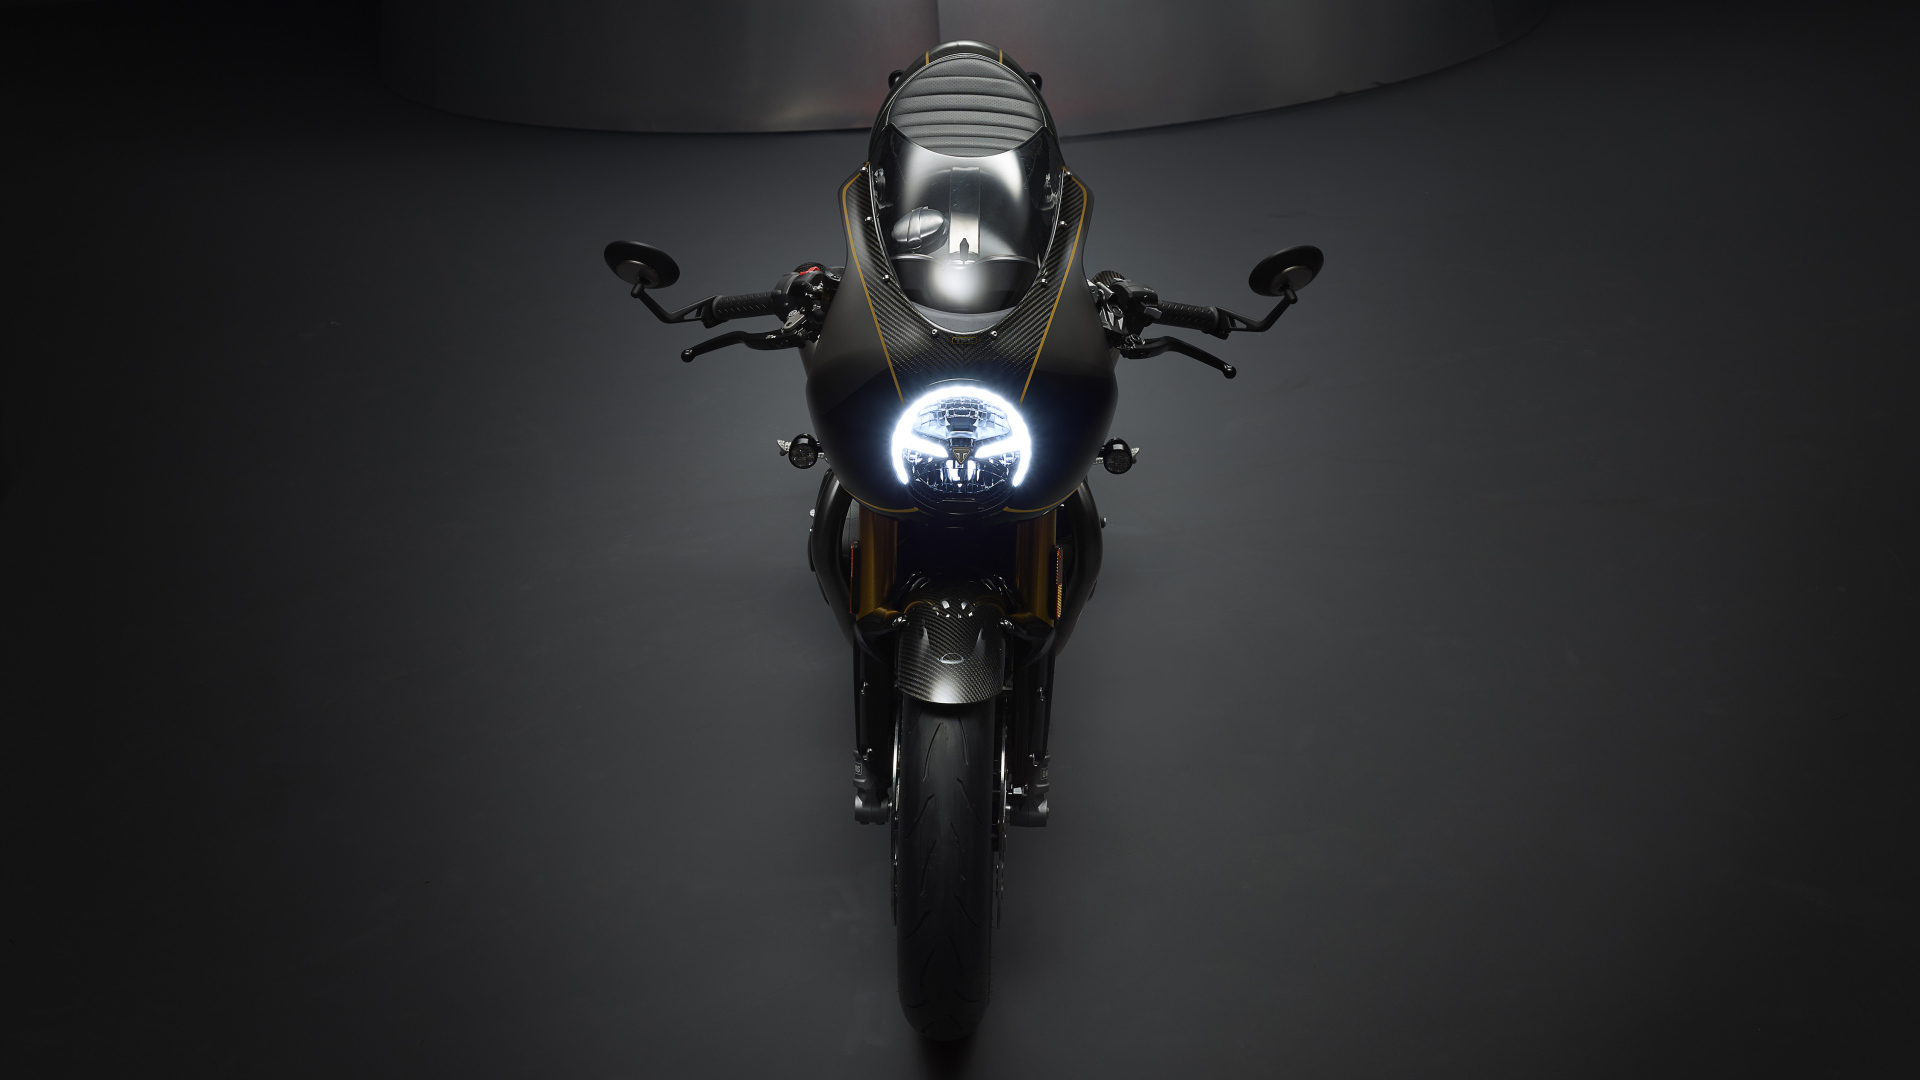 Motorcycle Triumph Thruxton TFC 2019 on a gray background